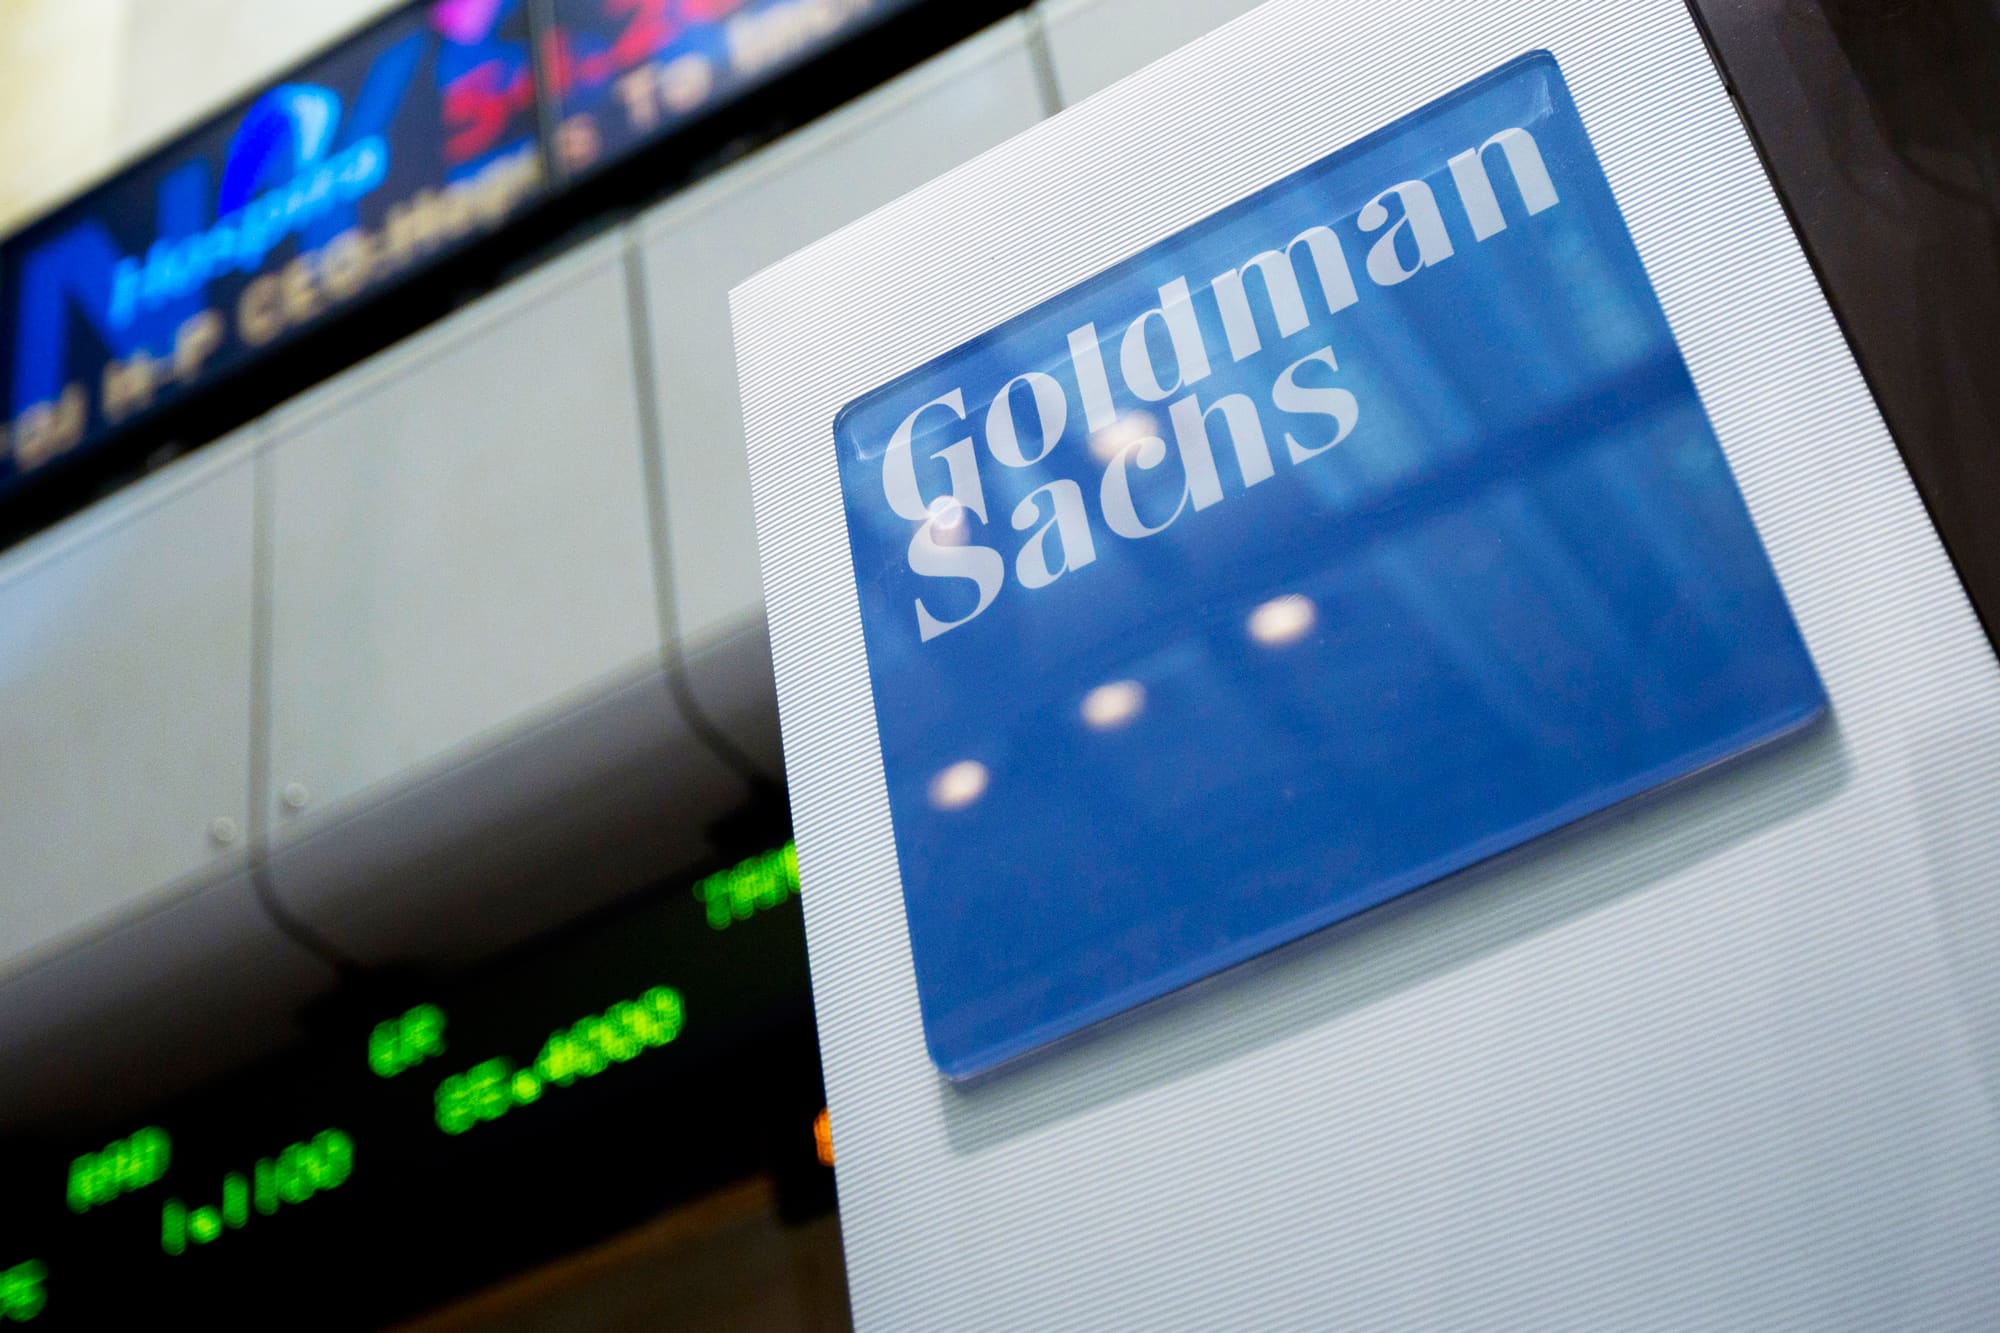 Jim Cramer says Goldman Sachs shares are a 'steal' after post-earnings tumble - CNBC : "Right now you can get this stock for $70 less than where it was two and a half months ago. I think it's a steal," the "Mad Money" host said.  | Tranquility 國際社群